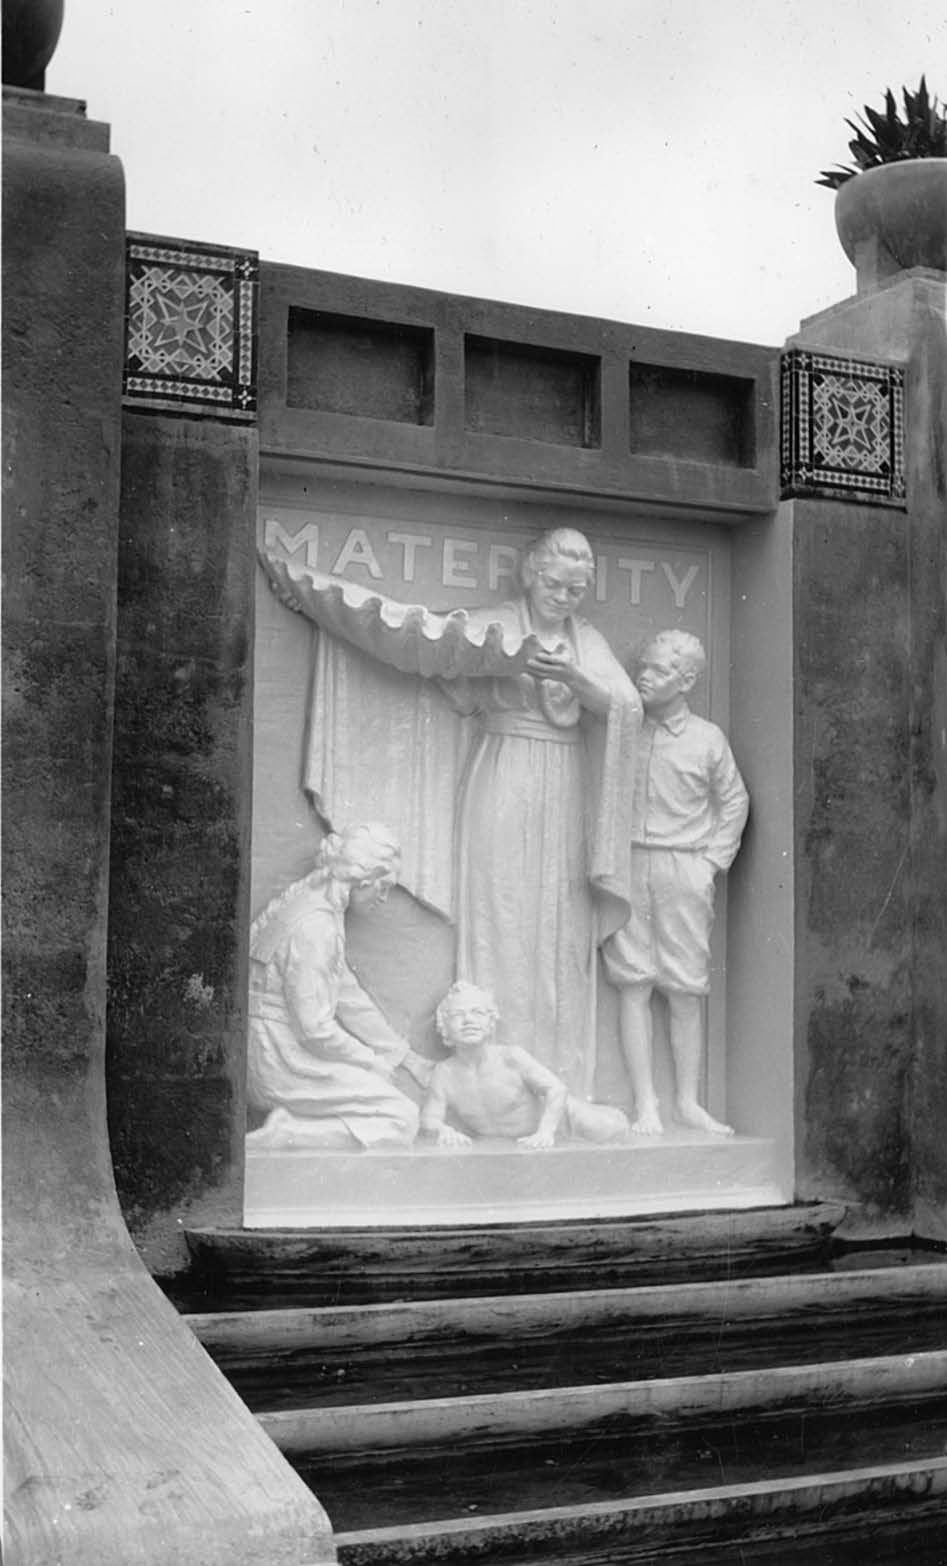 At the head of three pools is a bold relief panel designed and sculpted by Avard Fairbanks to honor motherhood. Courtesy of Church History Library.